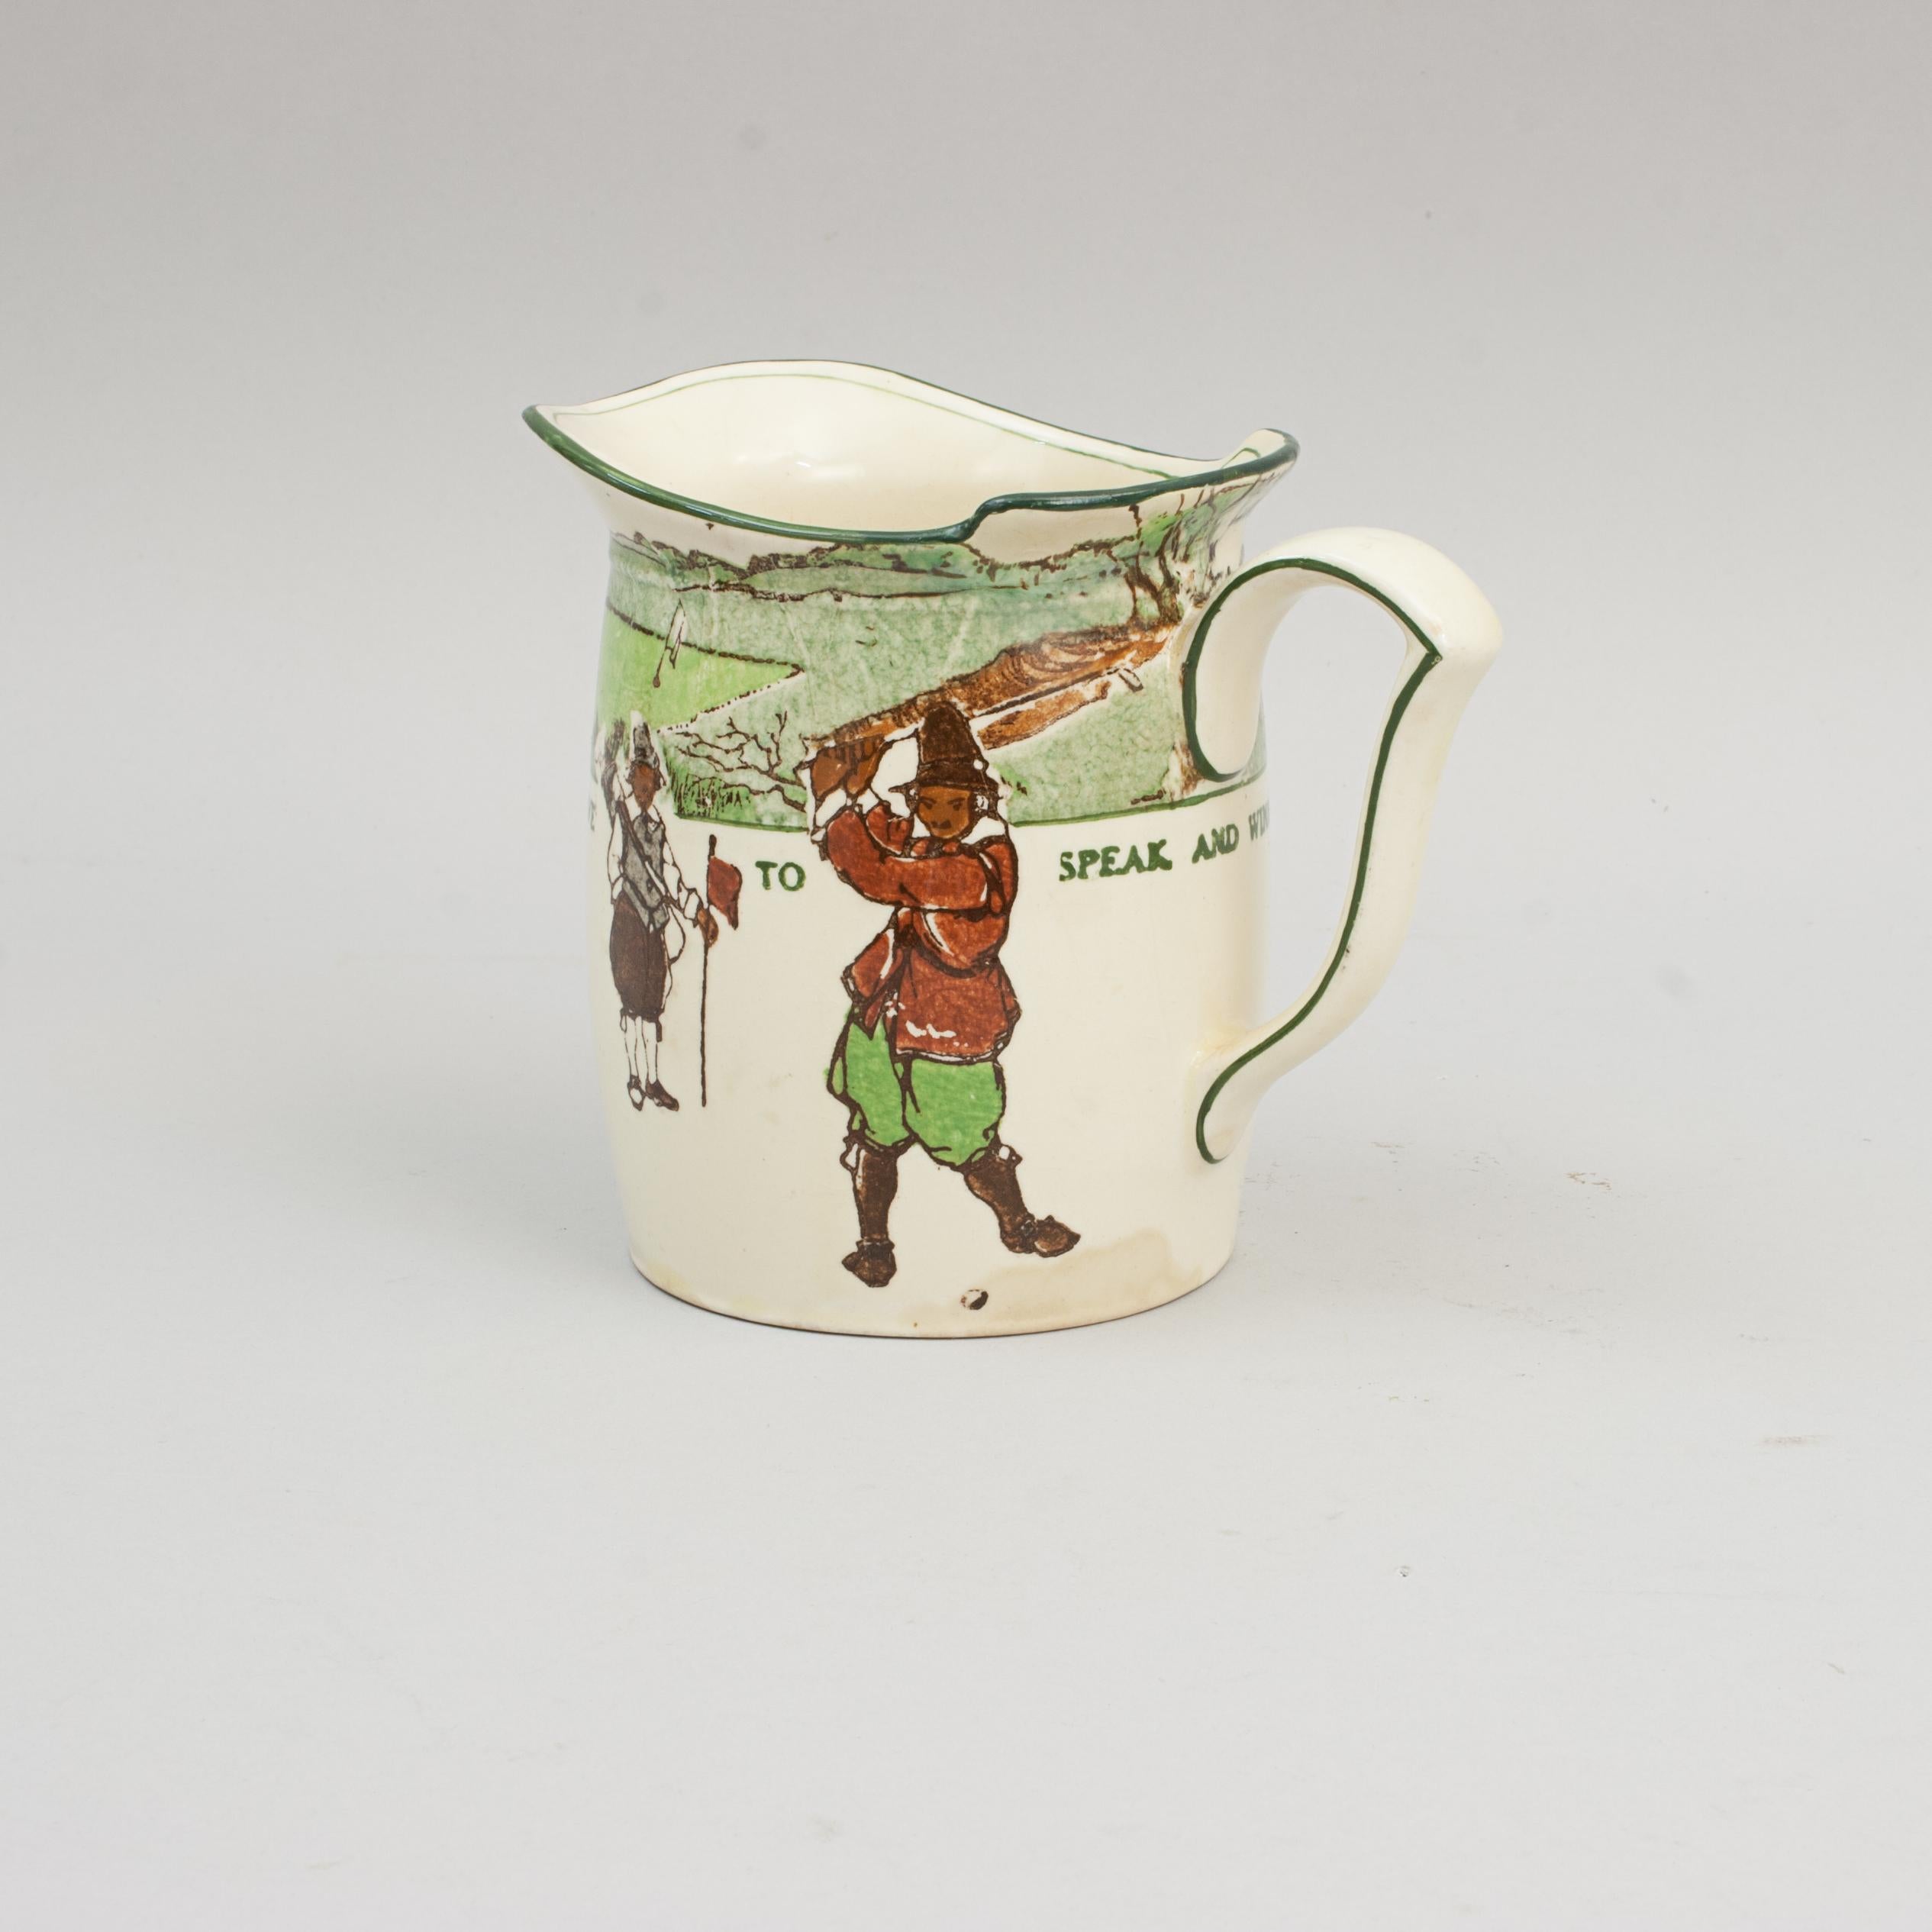 Royal Doulton Series Ware Golf jug.
Royal Doulton jug with polychrome golf scene and the proverb, 